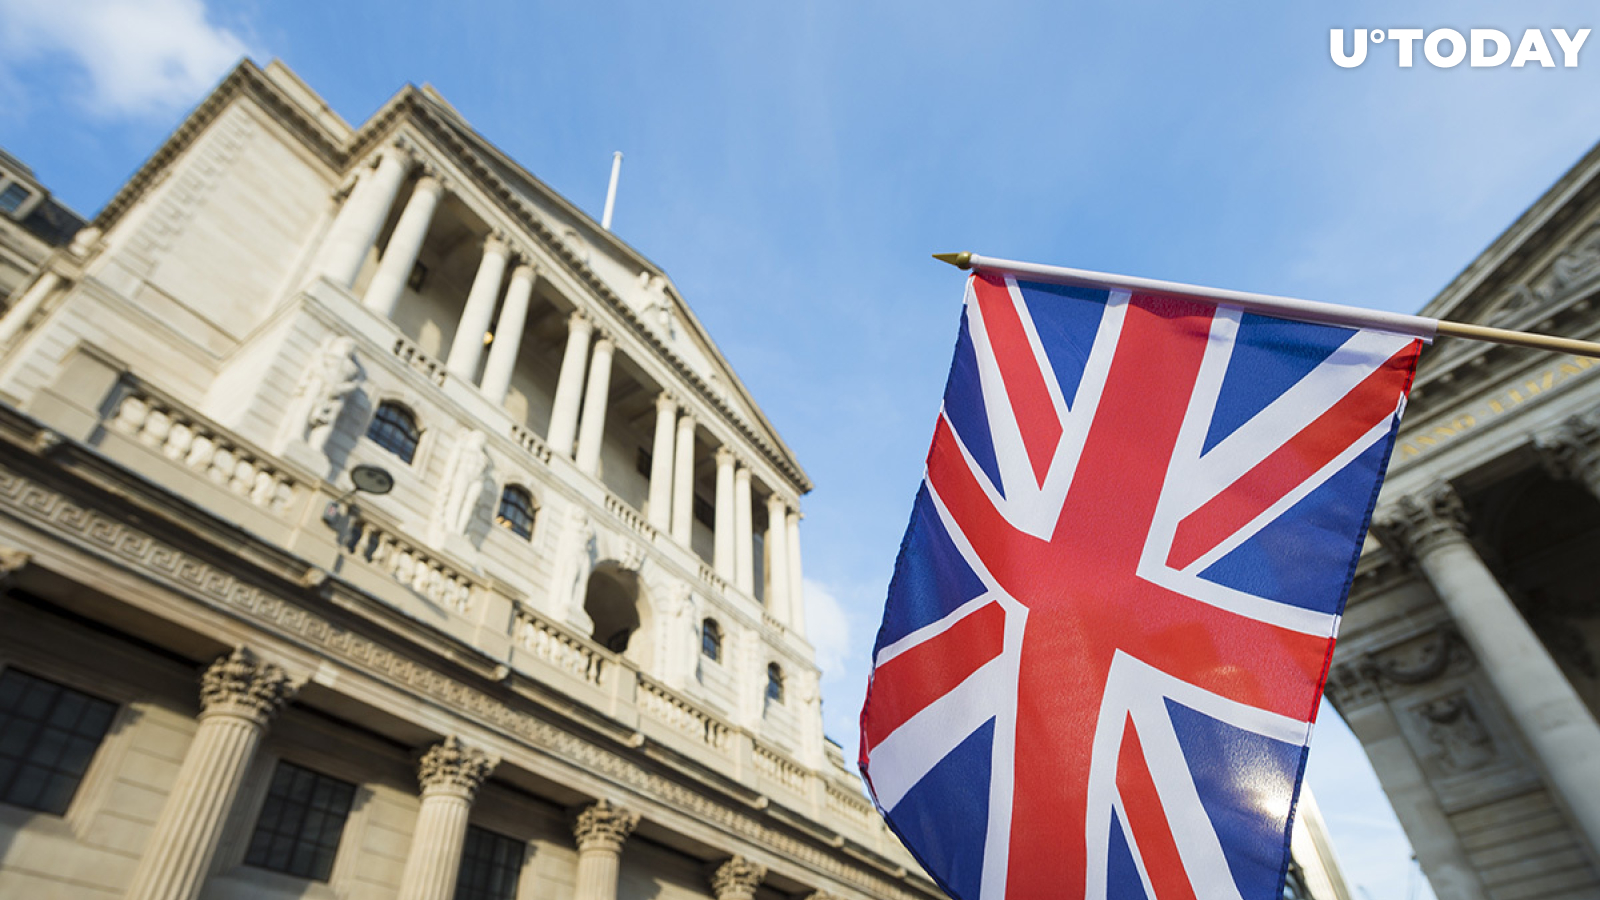 UK May Launch Digital Currency Under Certain Circumstances: Bank of England Rep